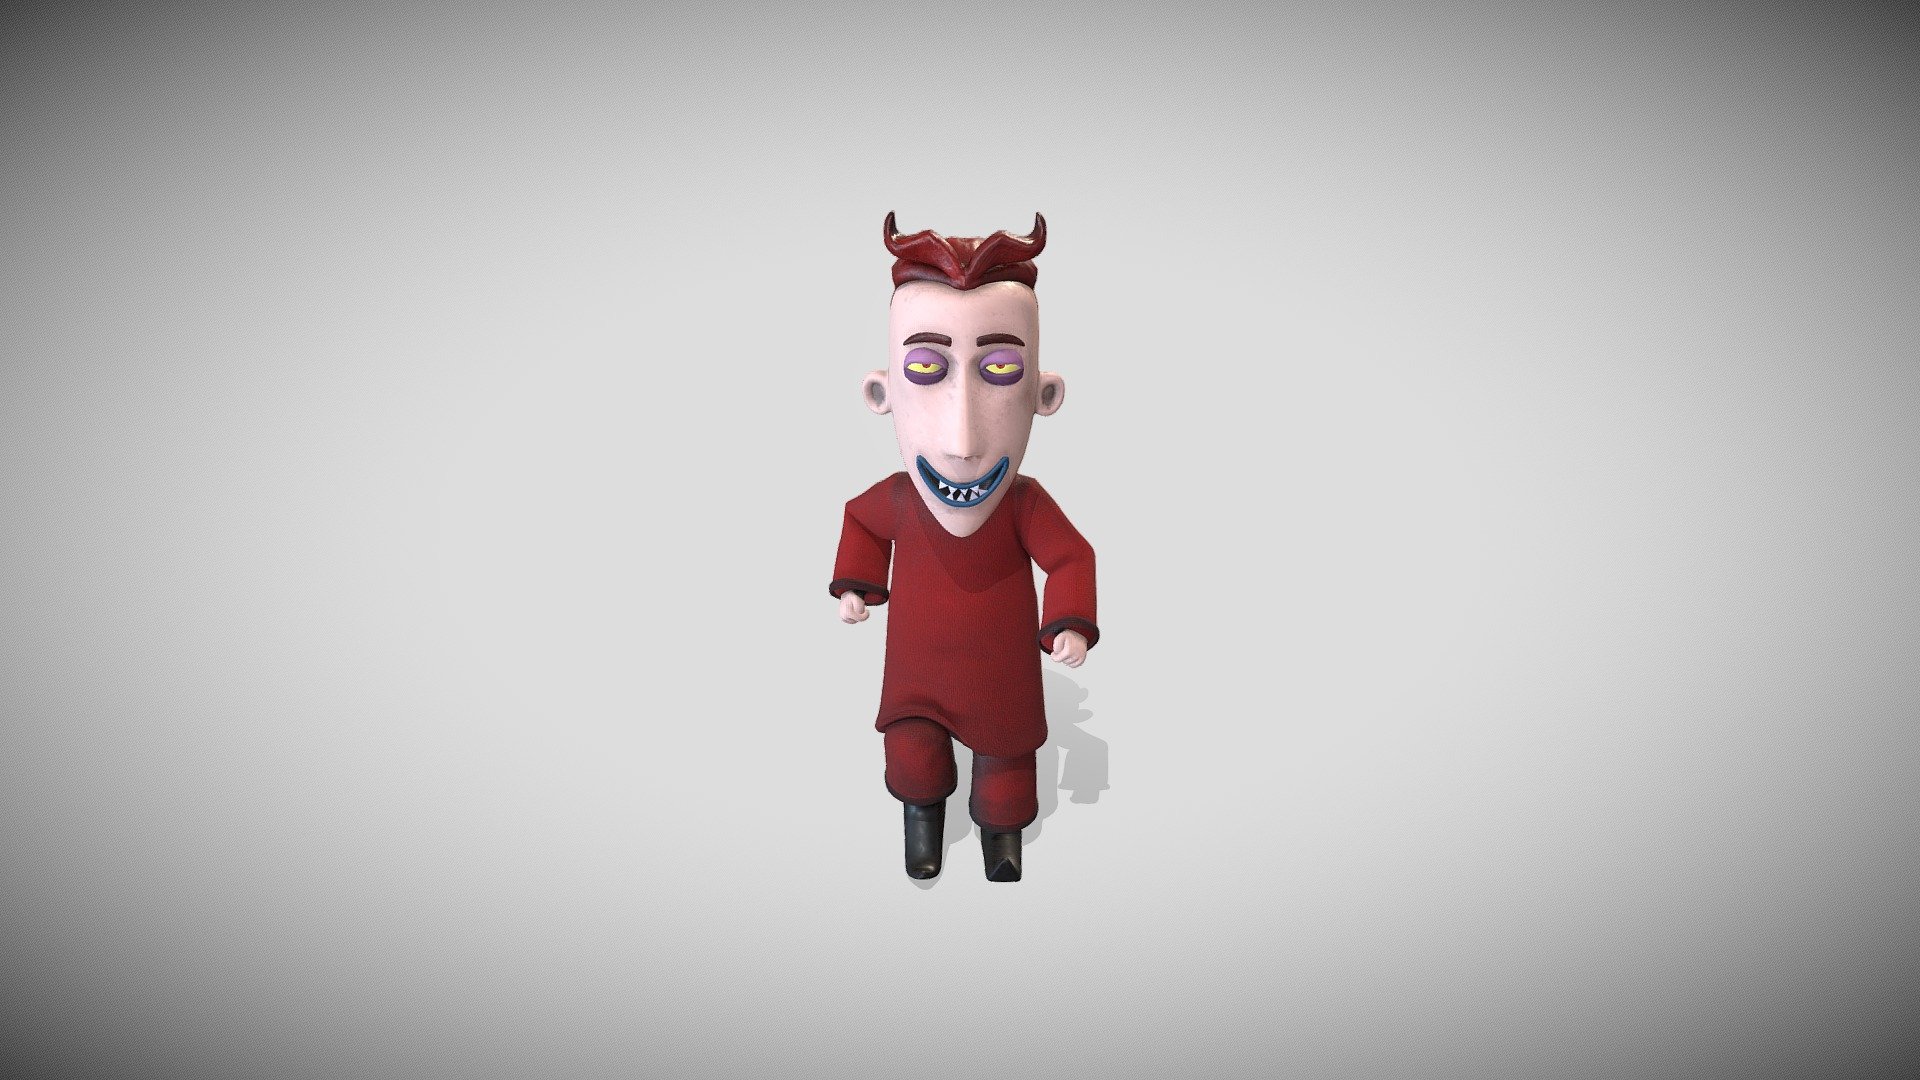 Lock (the strange world of jack) - Character 3D Rigged animated Low Poly

Artwork based on Tim Burton’s The Nightmare Before Christmas - Lock character animated - 3D model by speedtwo 3d model